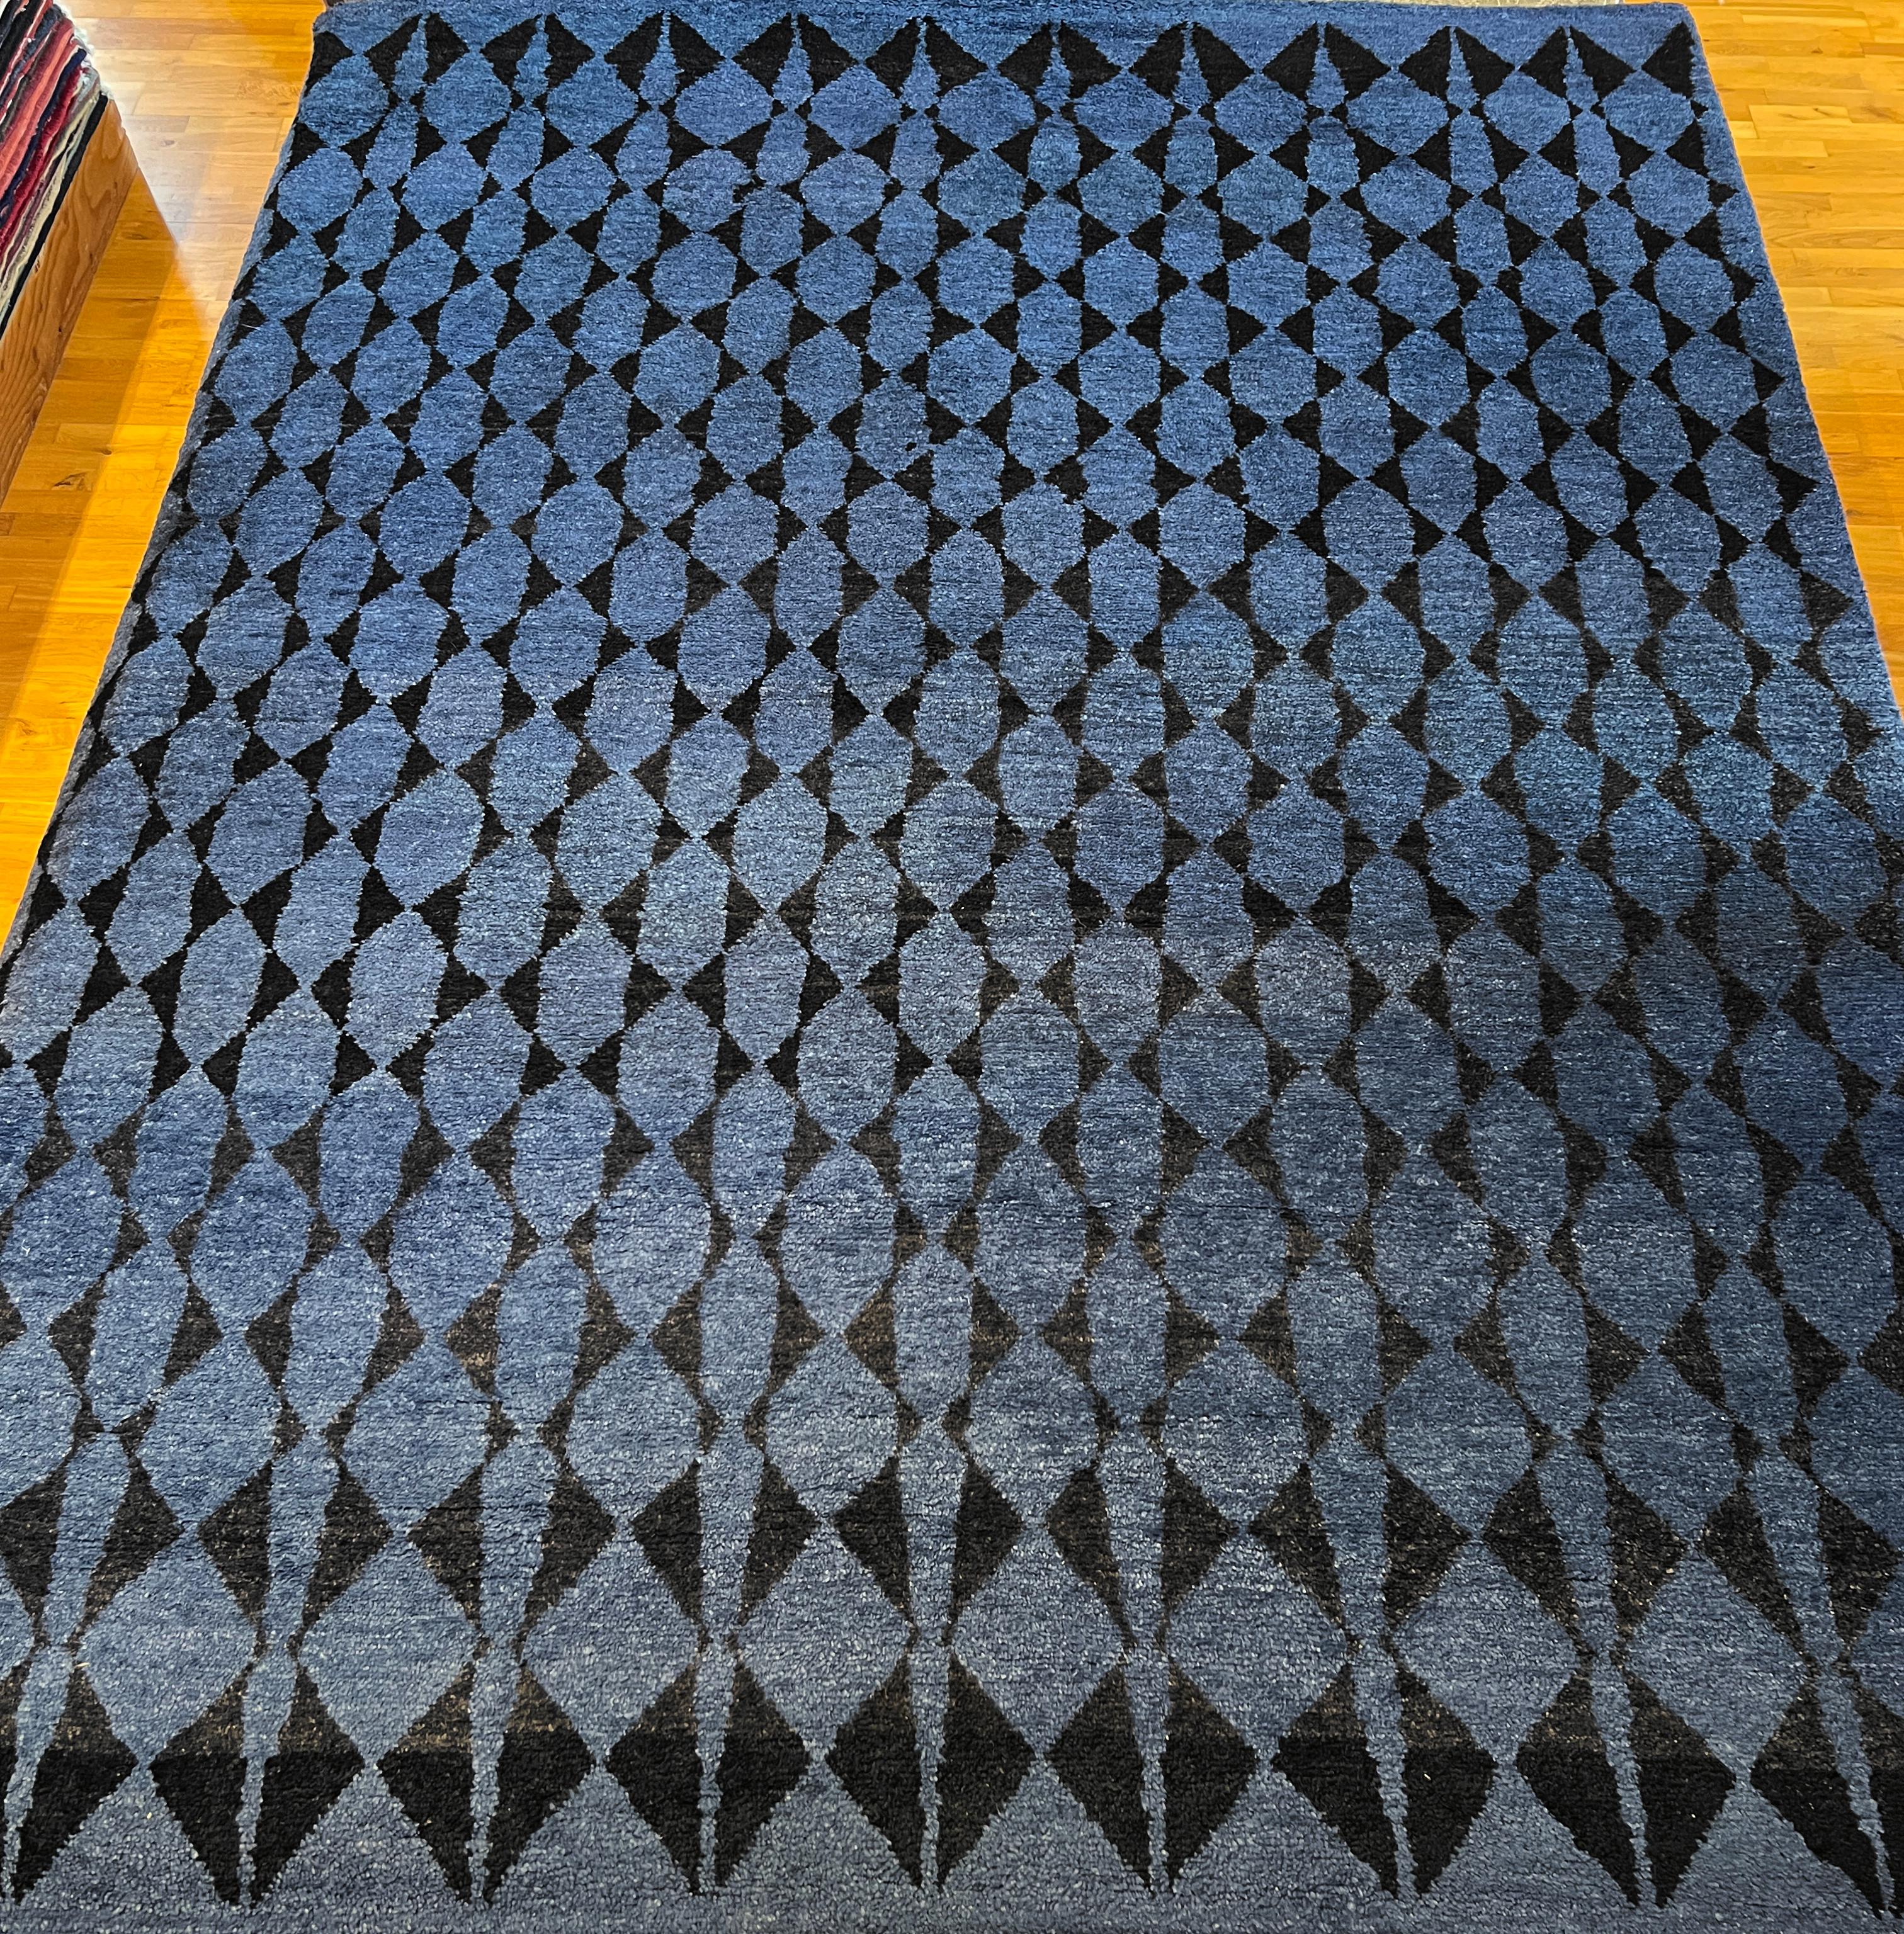 9'x12' Modern Moroccan Rug in Navy Blue In New Condition For Sale In Los Angeles, CA